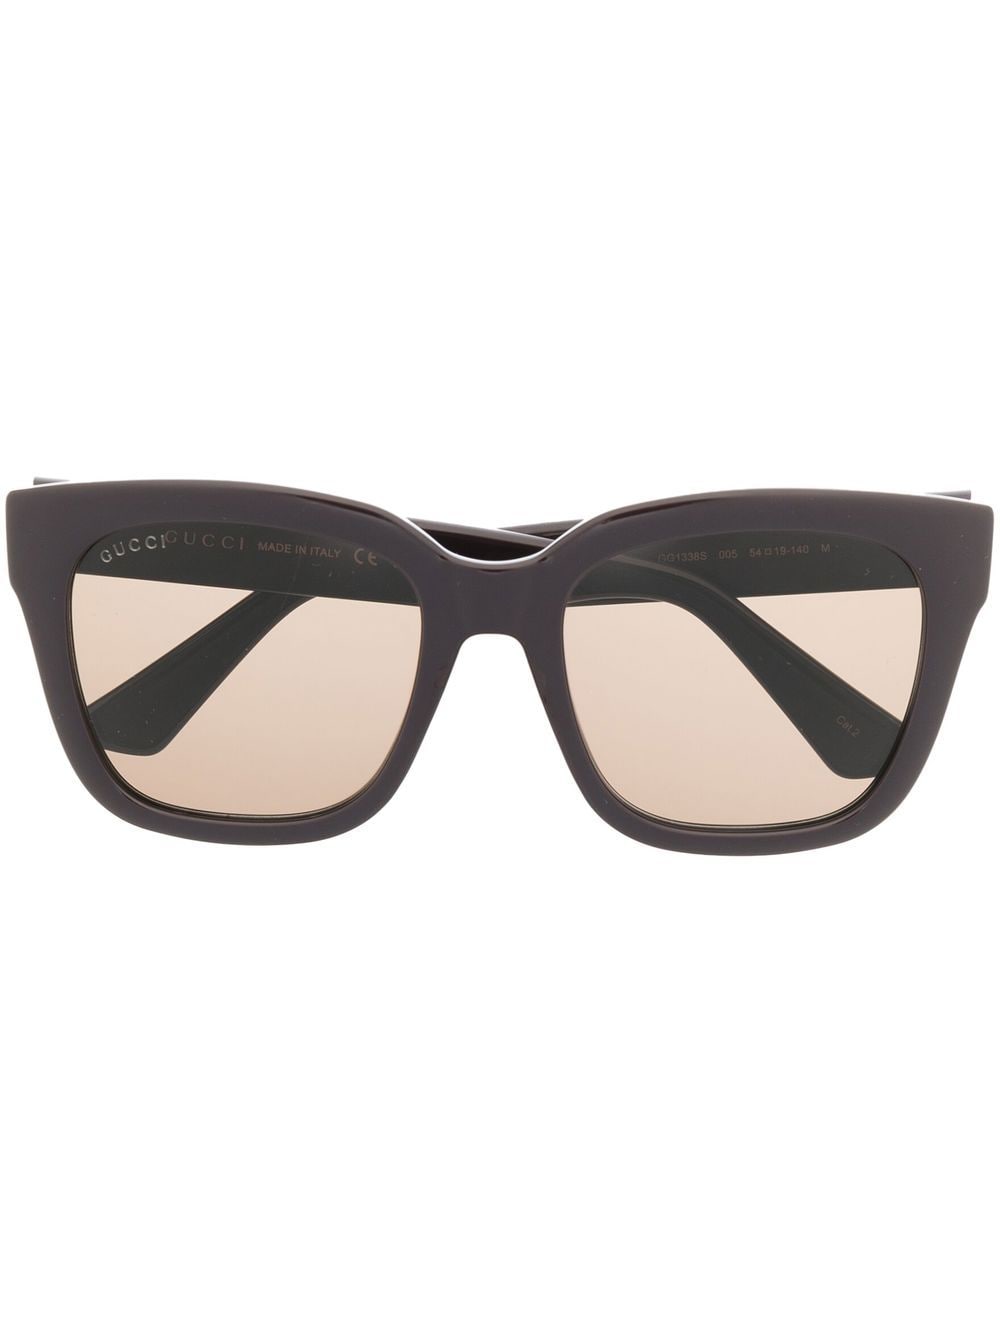 Gucci Rectangle-frame Sunglasses In Brown